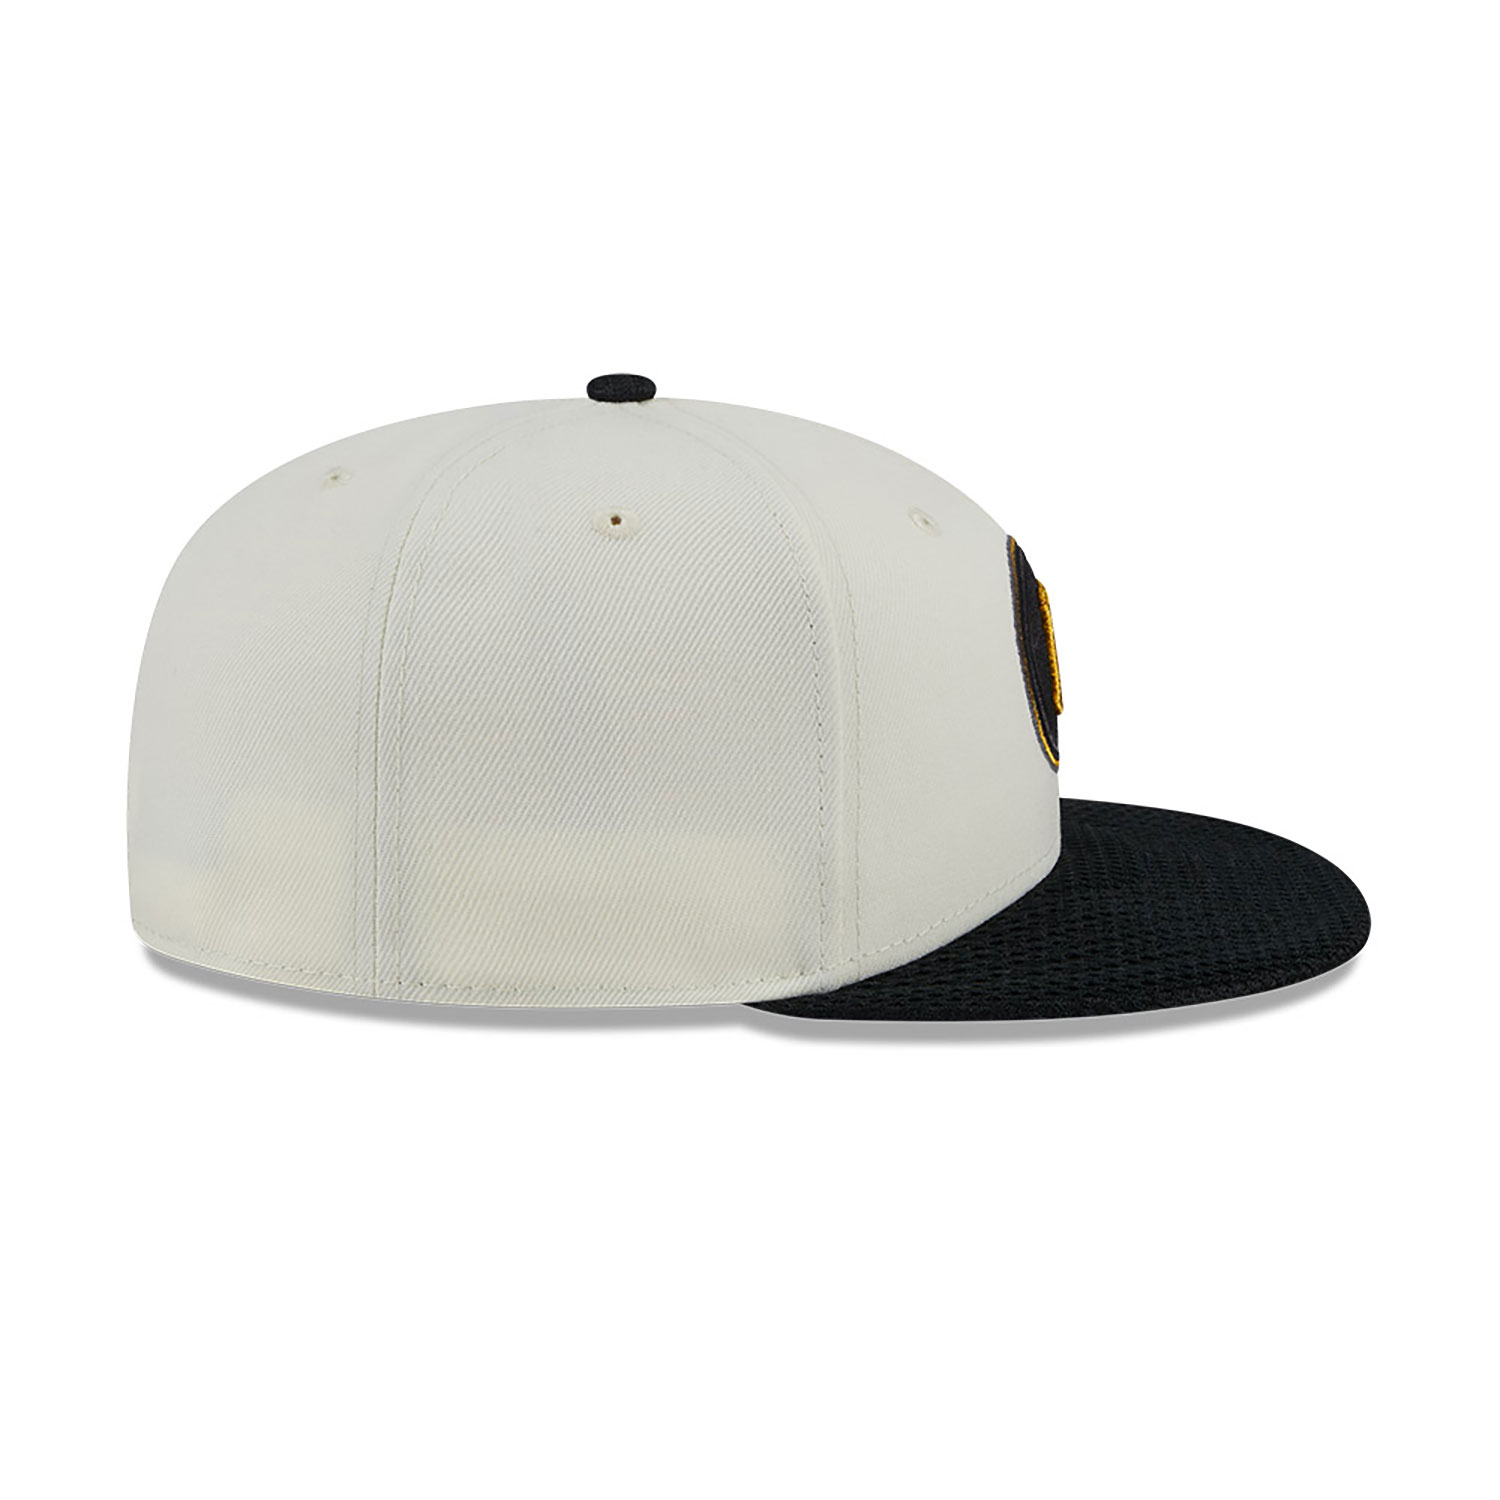 Pittsburgh Pirates City Mesh Chrome White 59FIFTY Fitted Cap